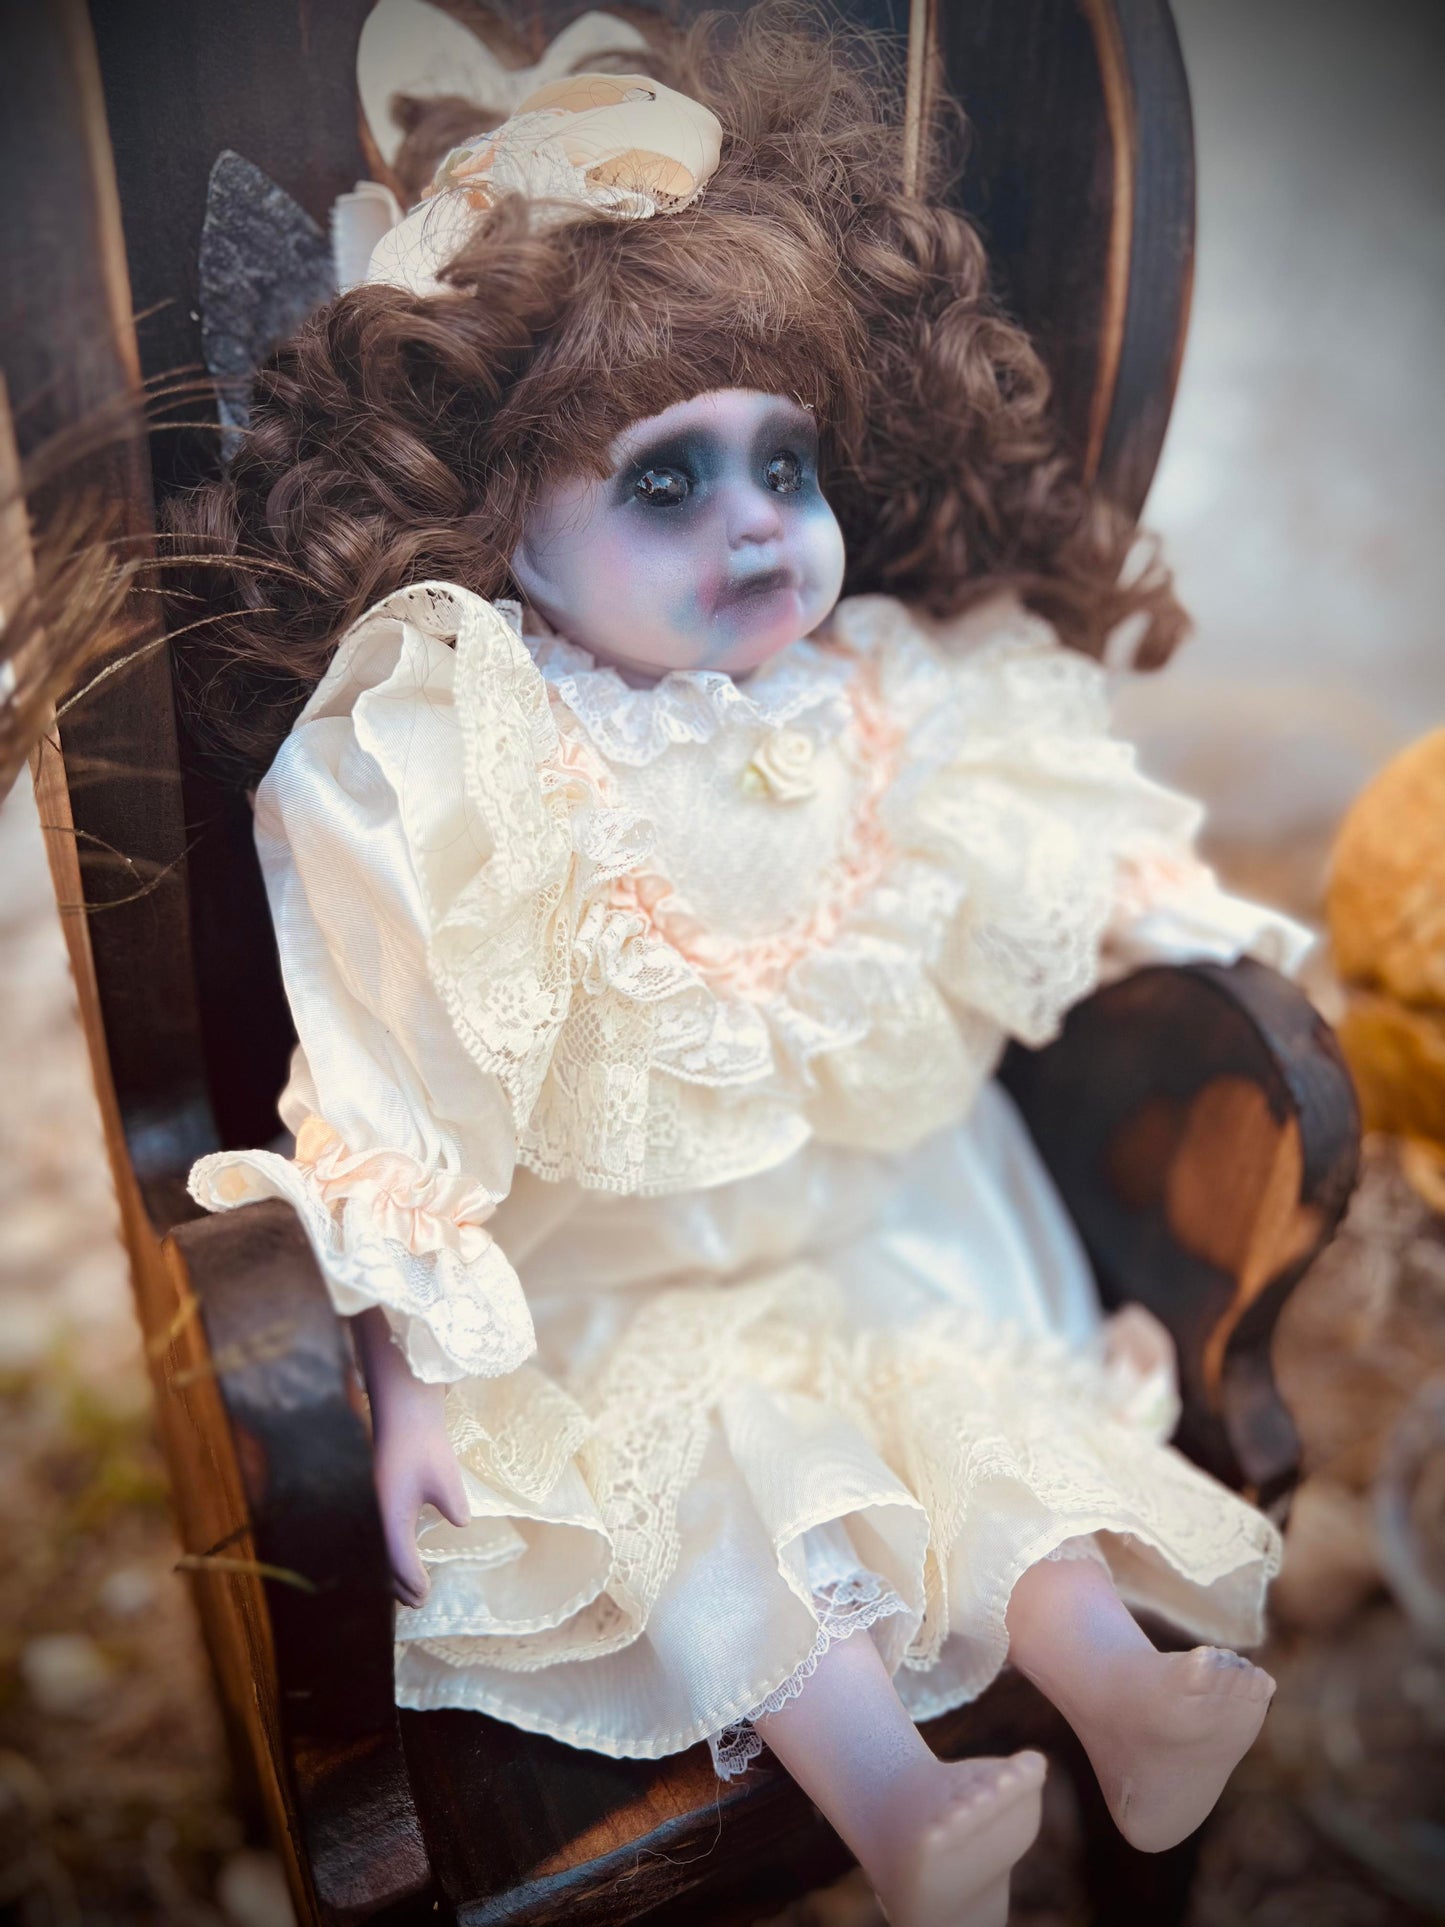 Meet Amelia 17" Vintage Baby Porcelain Haunted Spirt Infected Zombie Doll Scary Poltergeist Halloween Spooky Hand Painted Gift Idea's